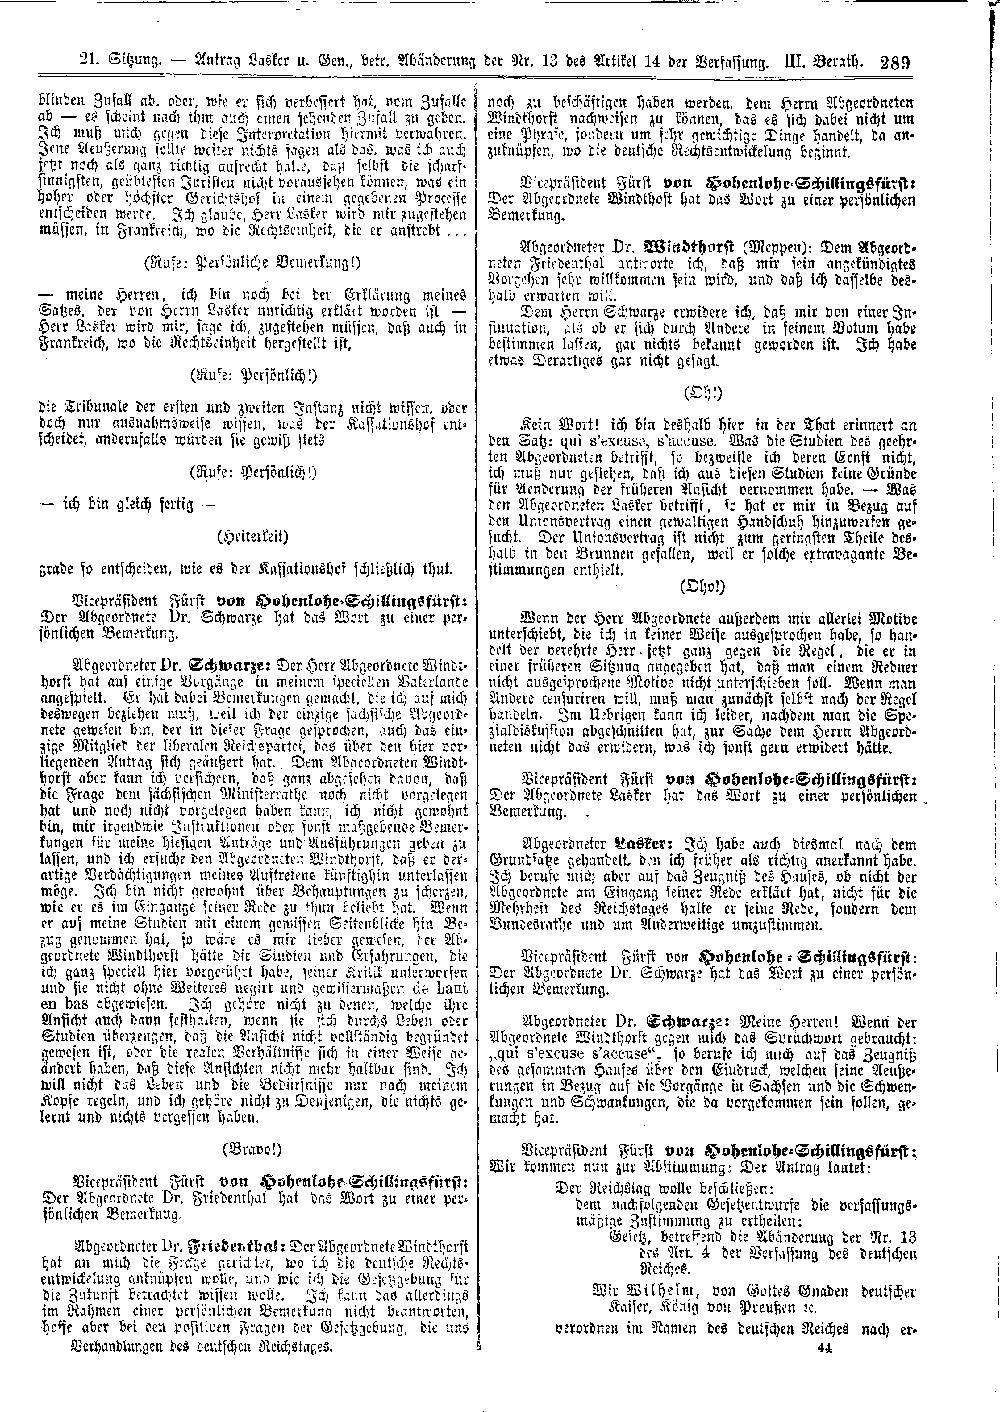 Scan of page 289